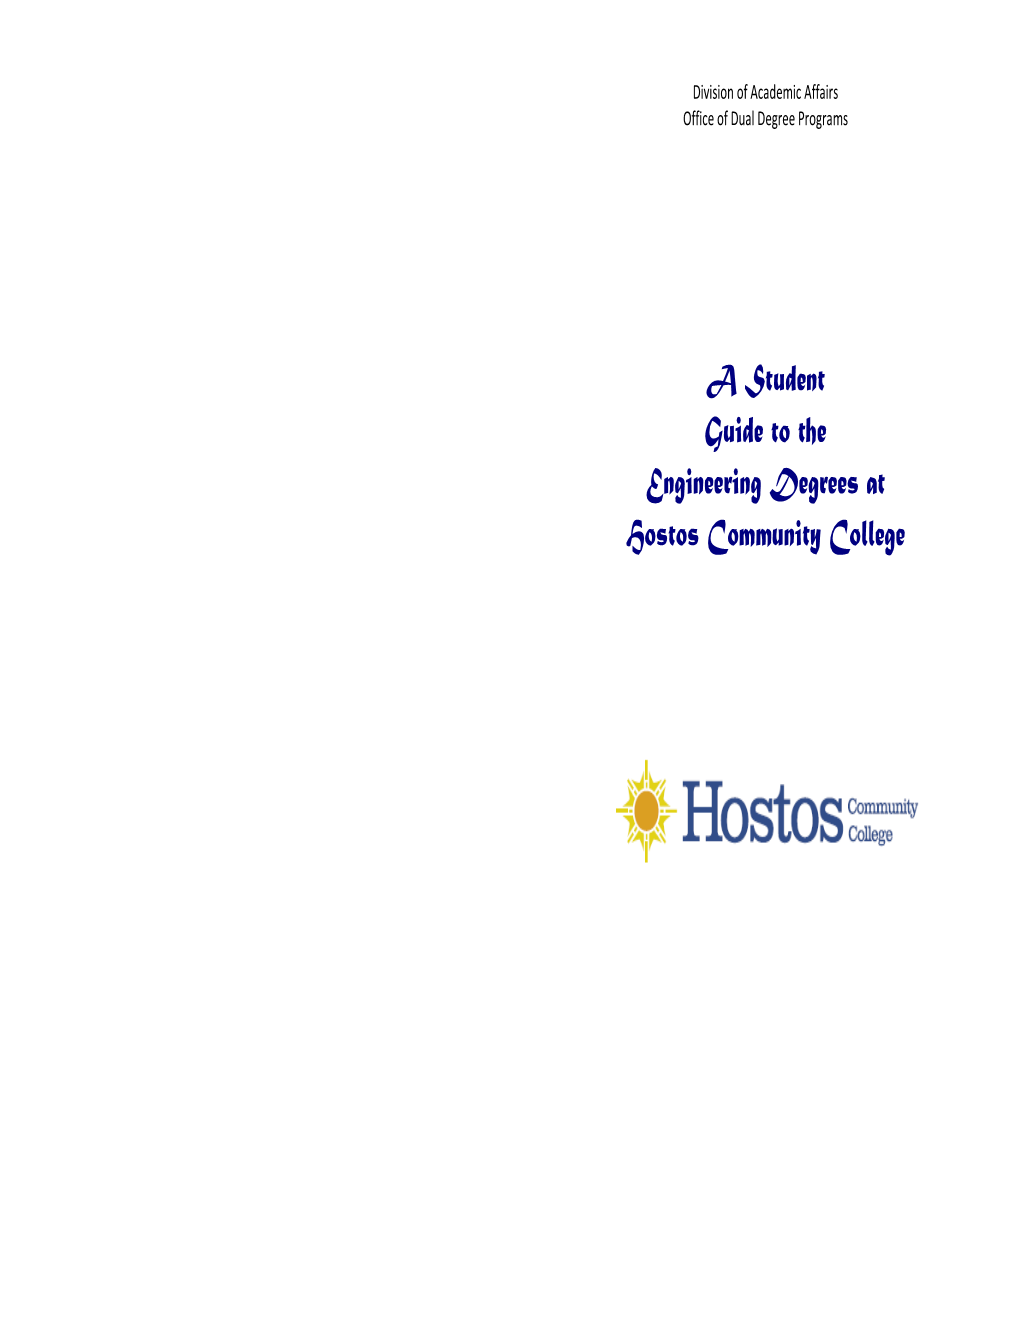 A Student Guide to the Engineering Degrees at Hostos Community College